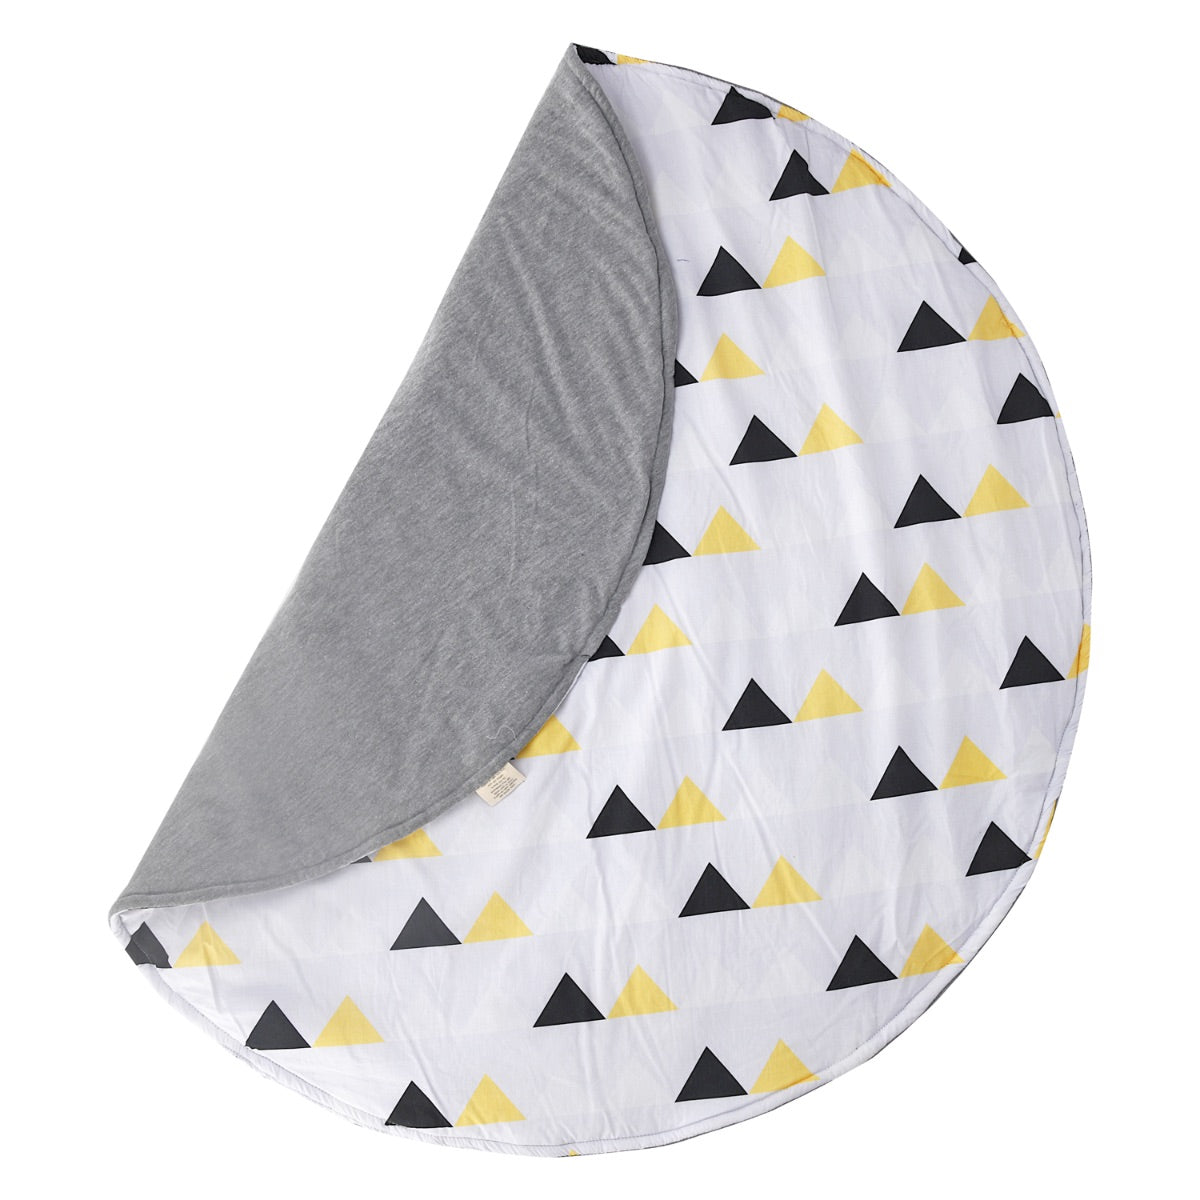 Little By Little Triangles Baby Playmat, Grey